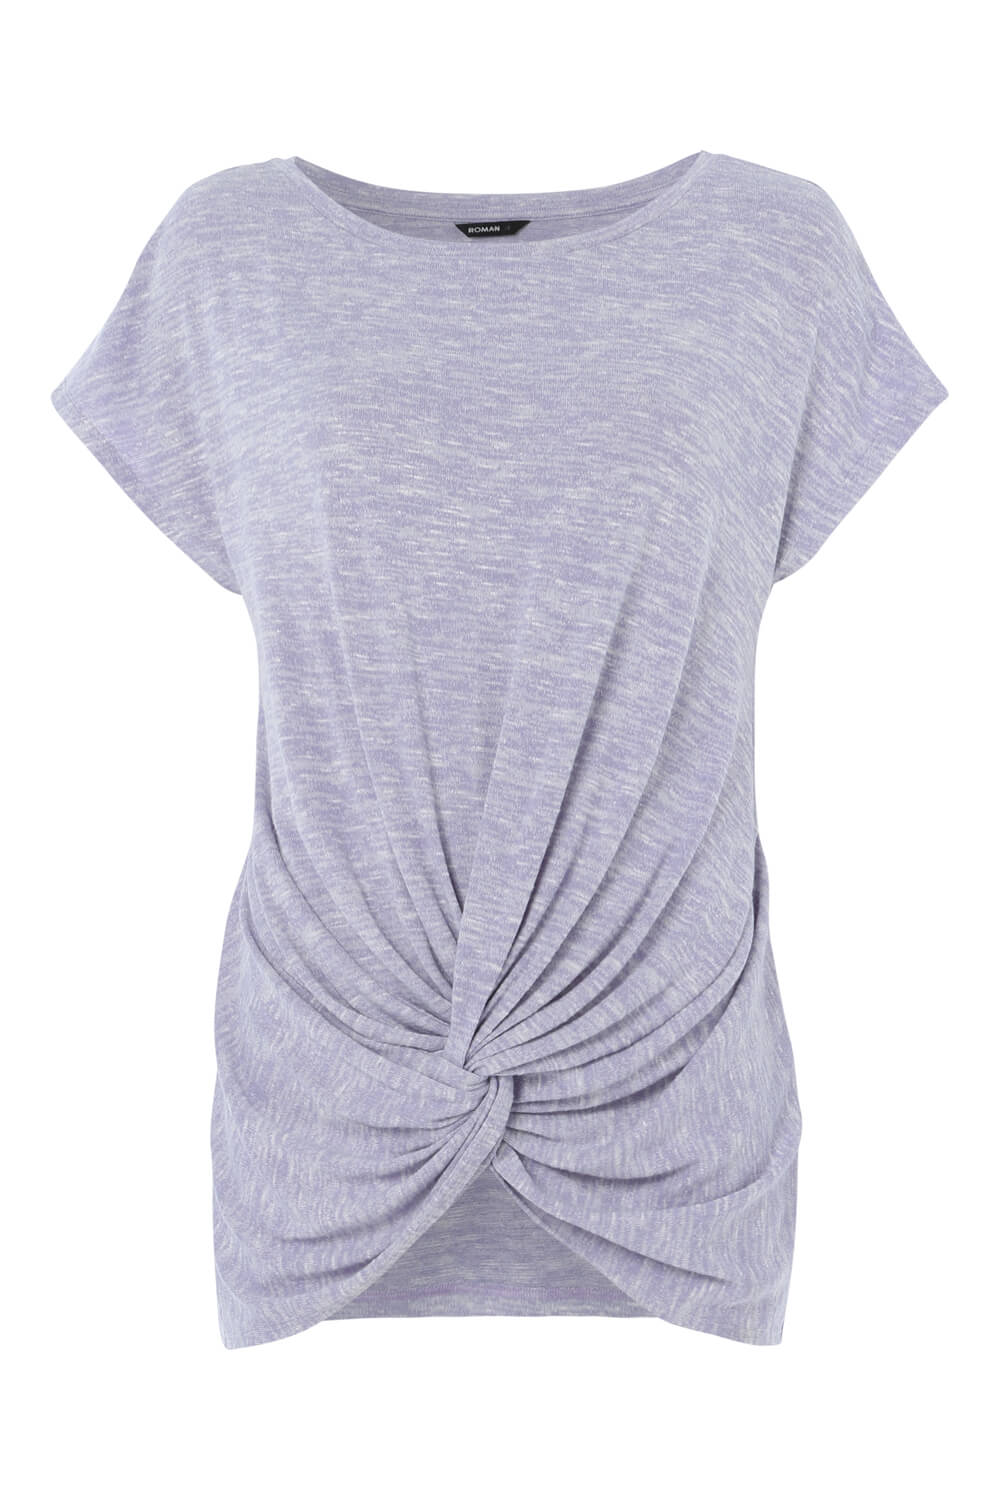 Lilac Knot Front Short Sleeve Top, Image 4 of 8